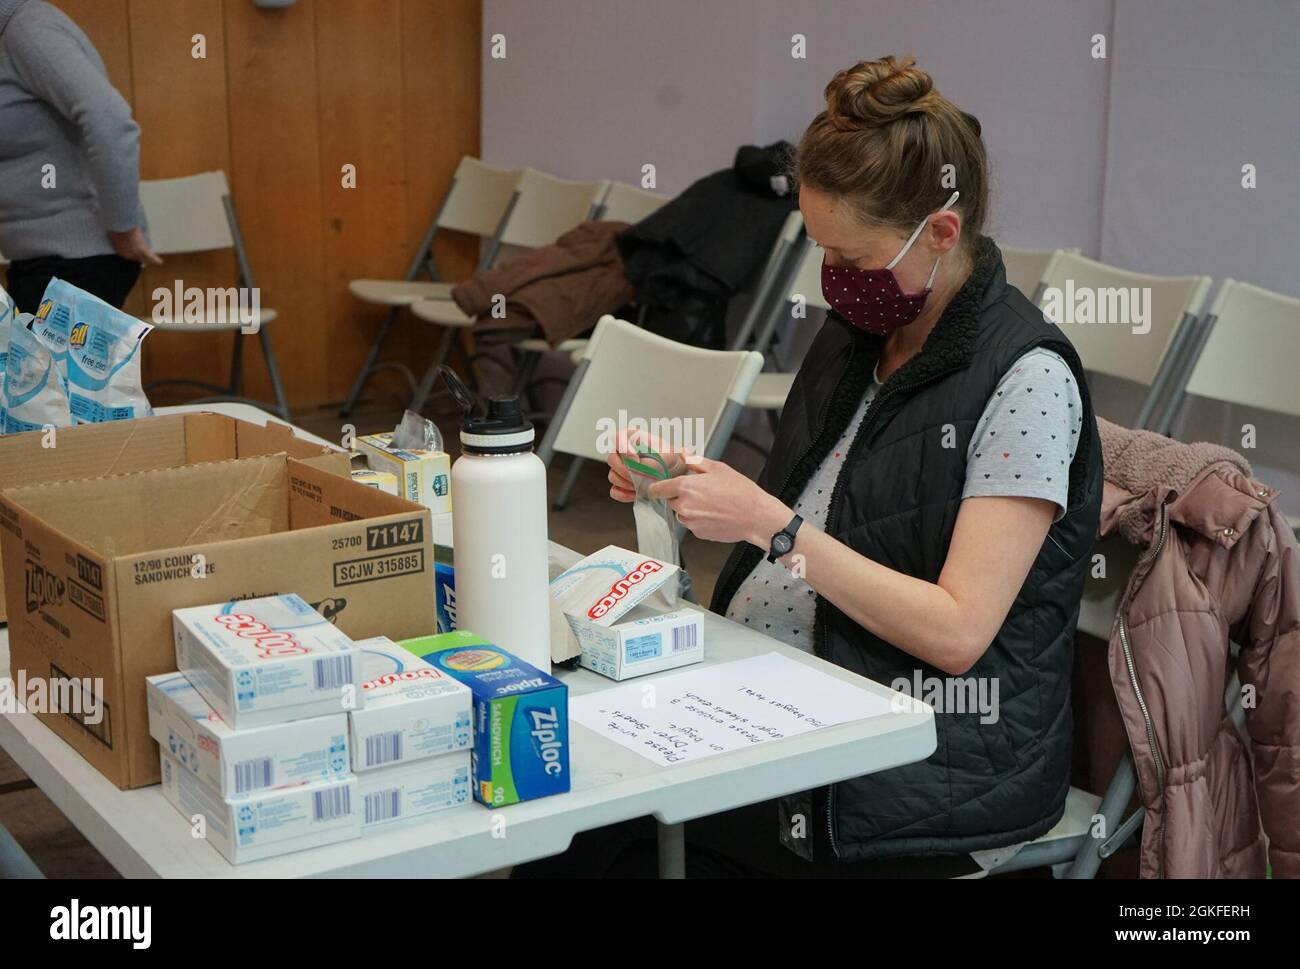 https://c8.alamy.com/comp/2GKFERH/rachel-savoie-chapel-volunteer-puts-dryer-sheets-in-a-plastic-bag-for-the-pcs-support-bags-the-usag-ansbach-chapel-is-creating-for-inbound-soldiers-and-families-the-support-bags-contain-supplies-such-as-paper-towels-hand-soap-cleaning-supplies-and-laundry-detergent-that-could-be-needed-the-first-48-hours-after-arriving-to-ansbach-the-chapel-volunteers-built-150-bags-with-the-plan-to-build-more-if-needed-2GKFERH.jpg